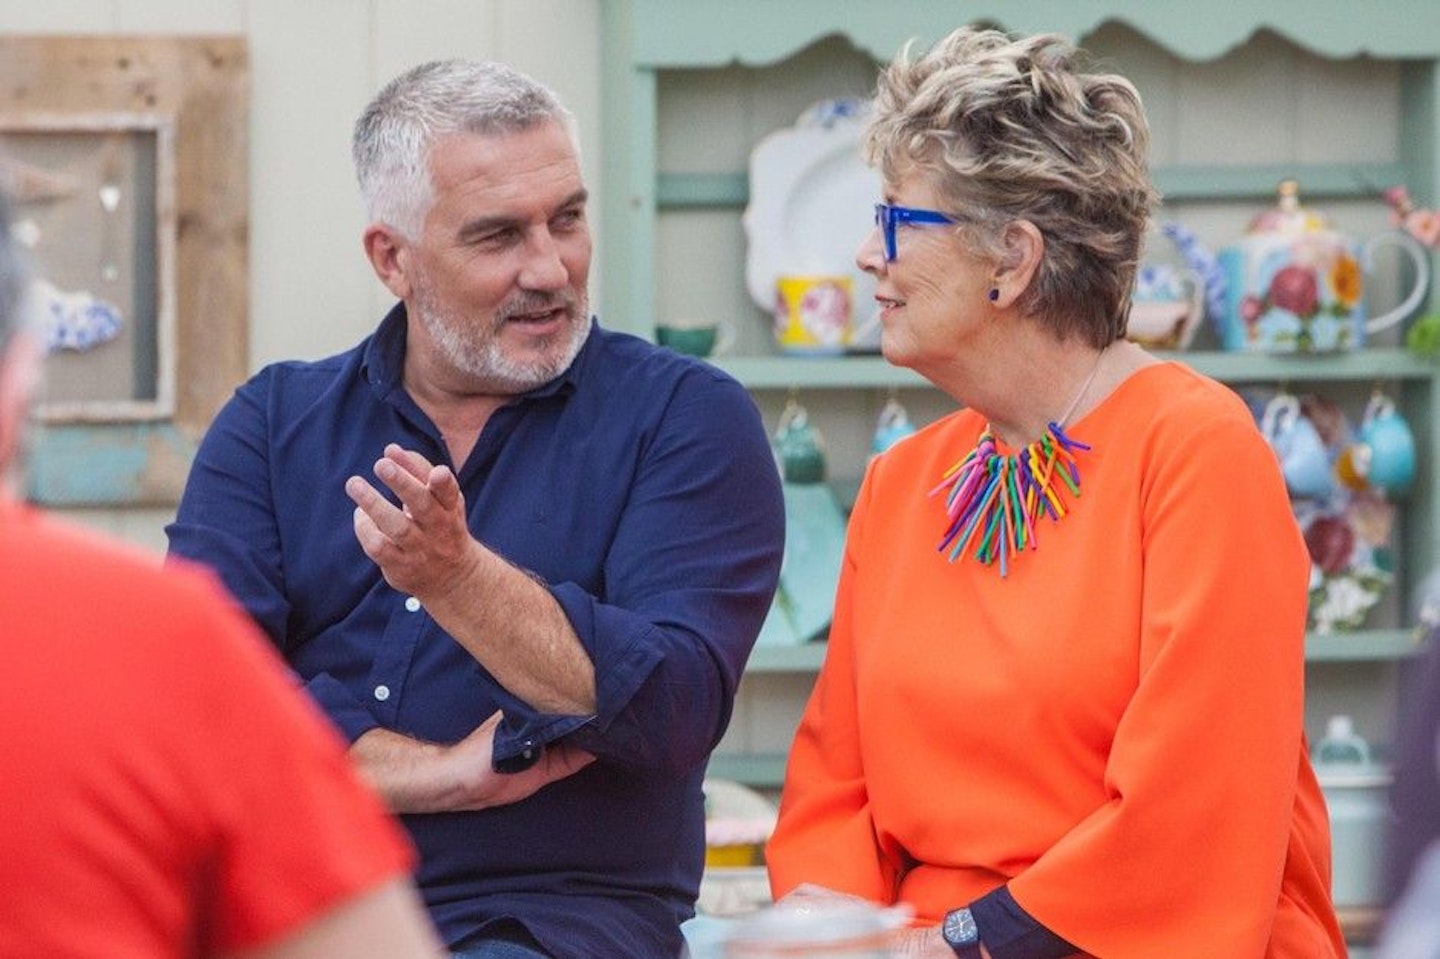 4. GBBO filming is intense